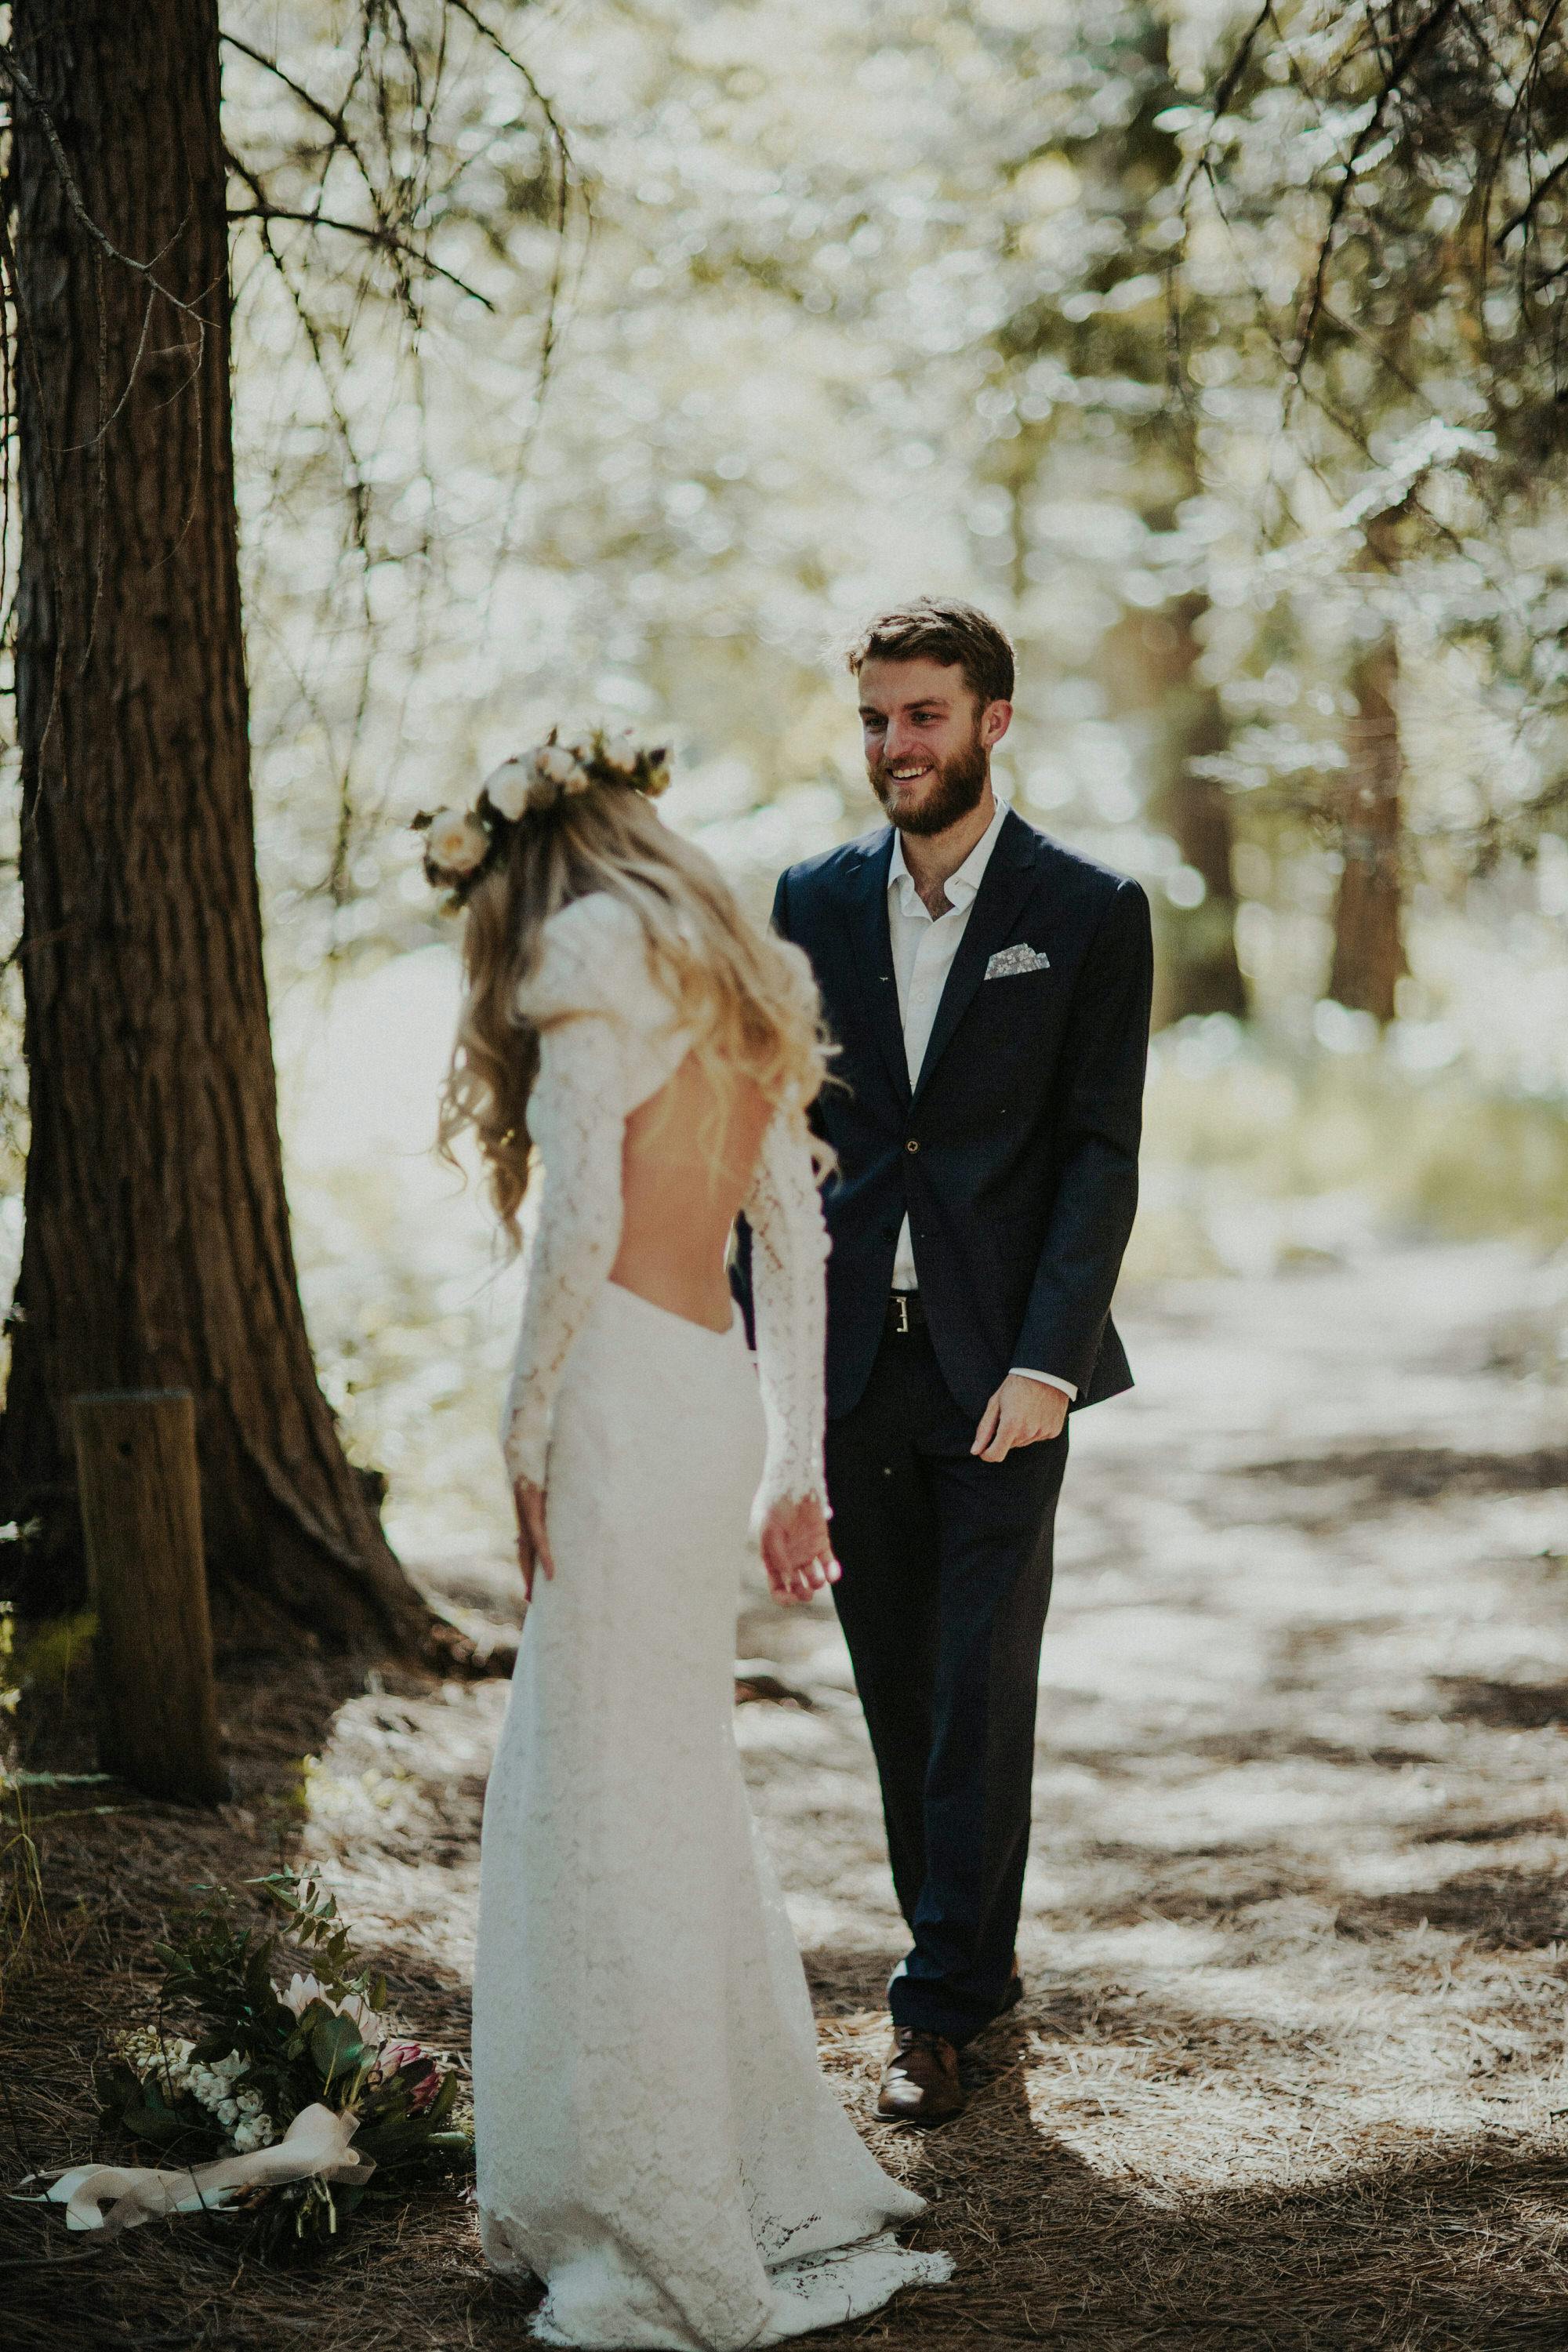 cool looking bride and groom at their elopement